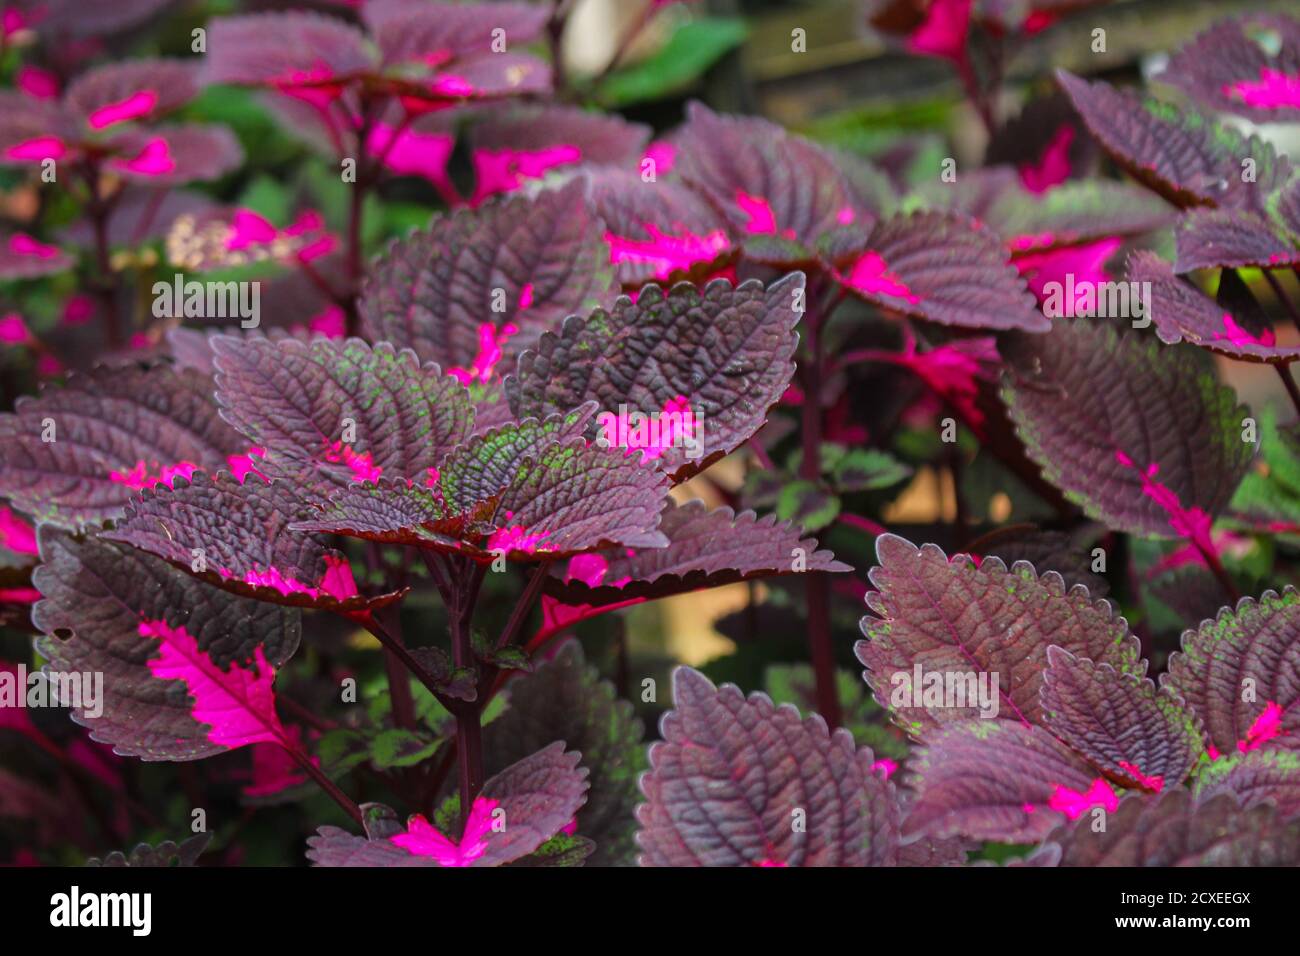 beautyful leaves,Multi colored leaves pink,purple and green color leaves growing in garden Stock Photo